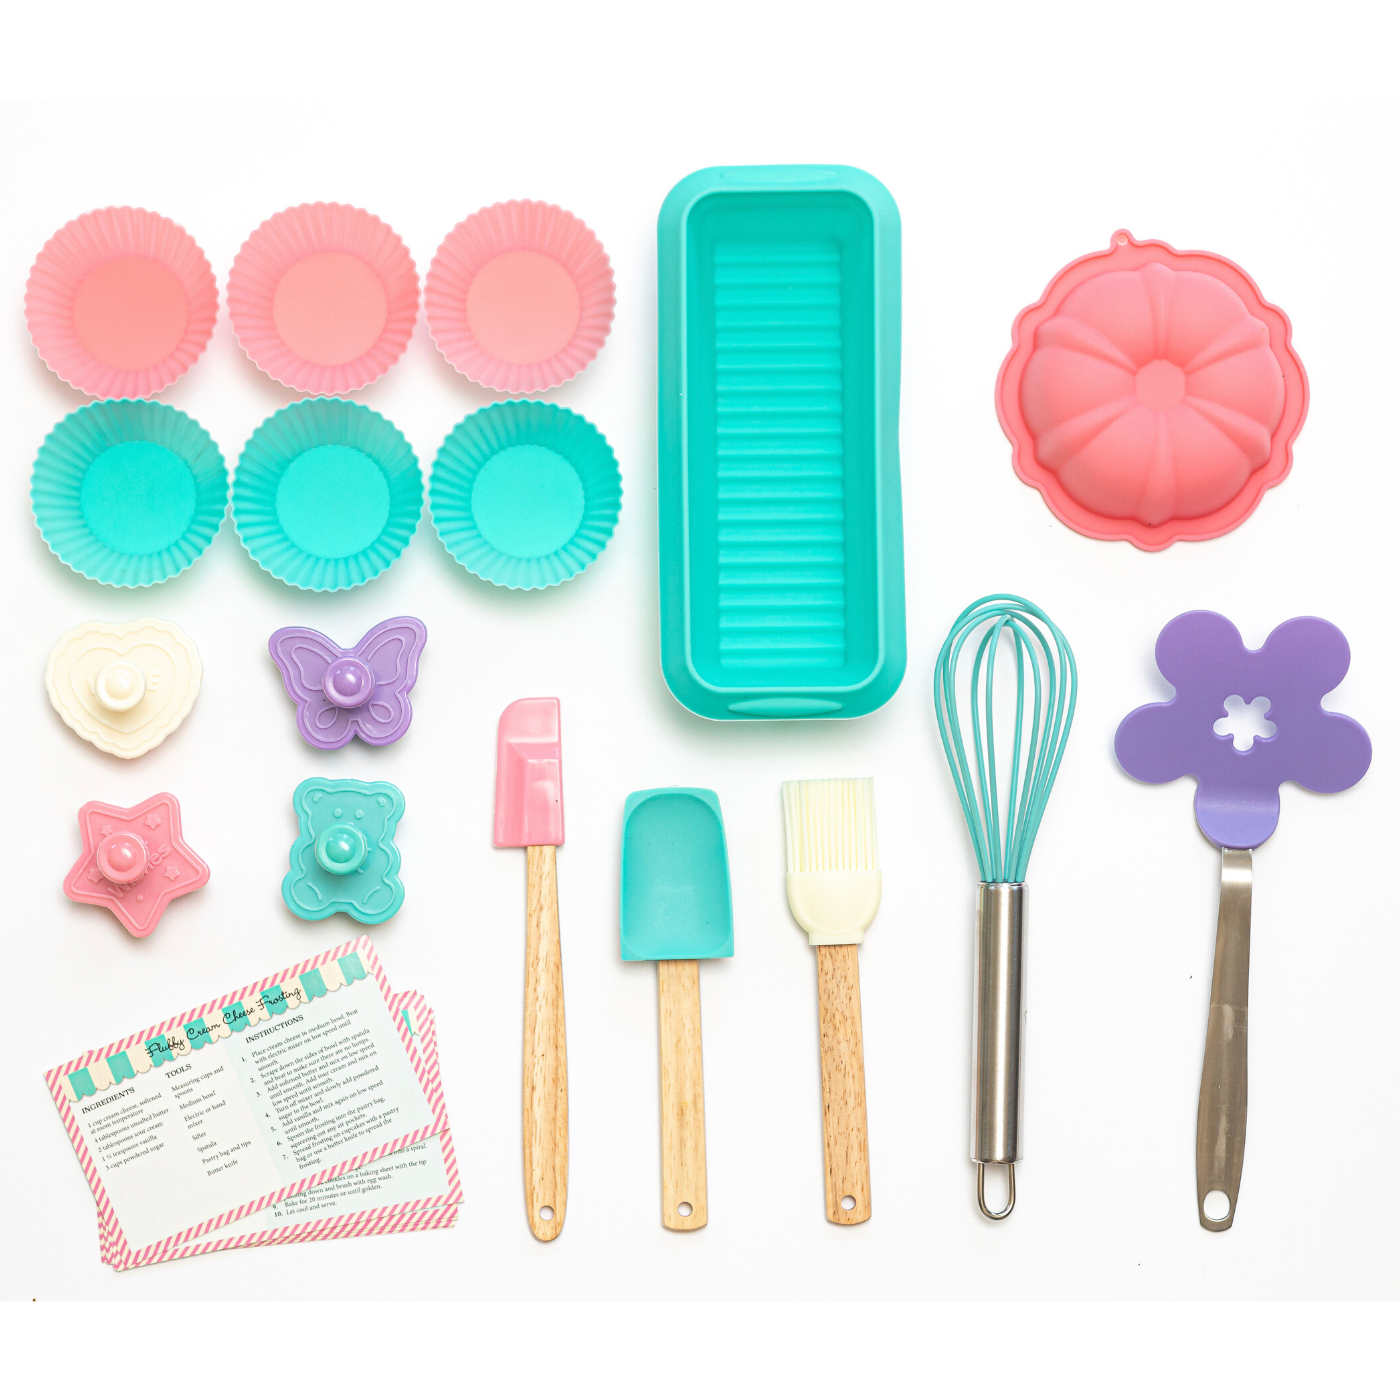 Easy Bake Oven Complete Deluxe Pan Set Includes 25 Cupcake/Muffin Papers